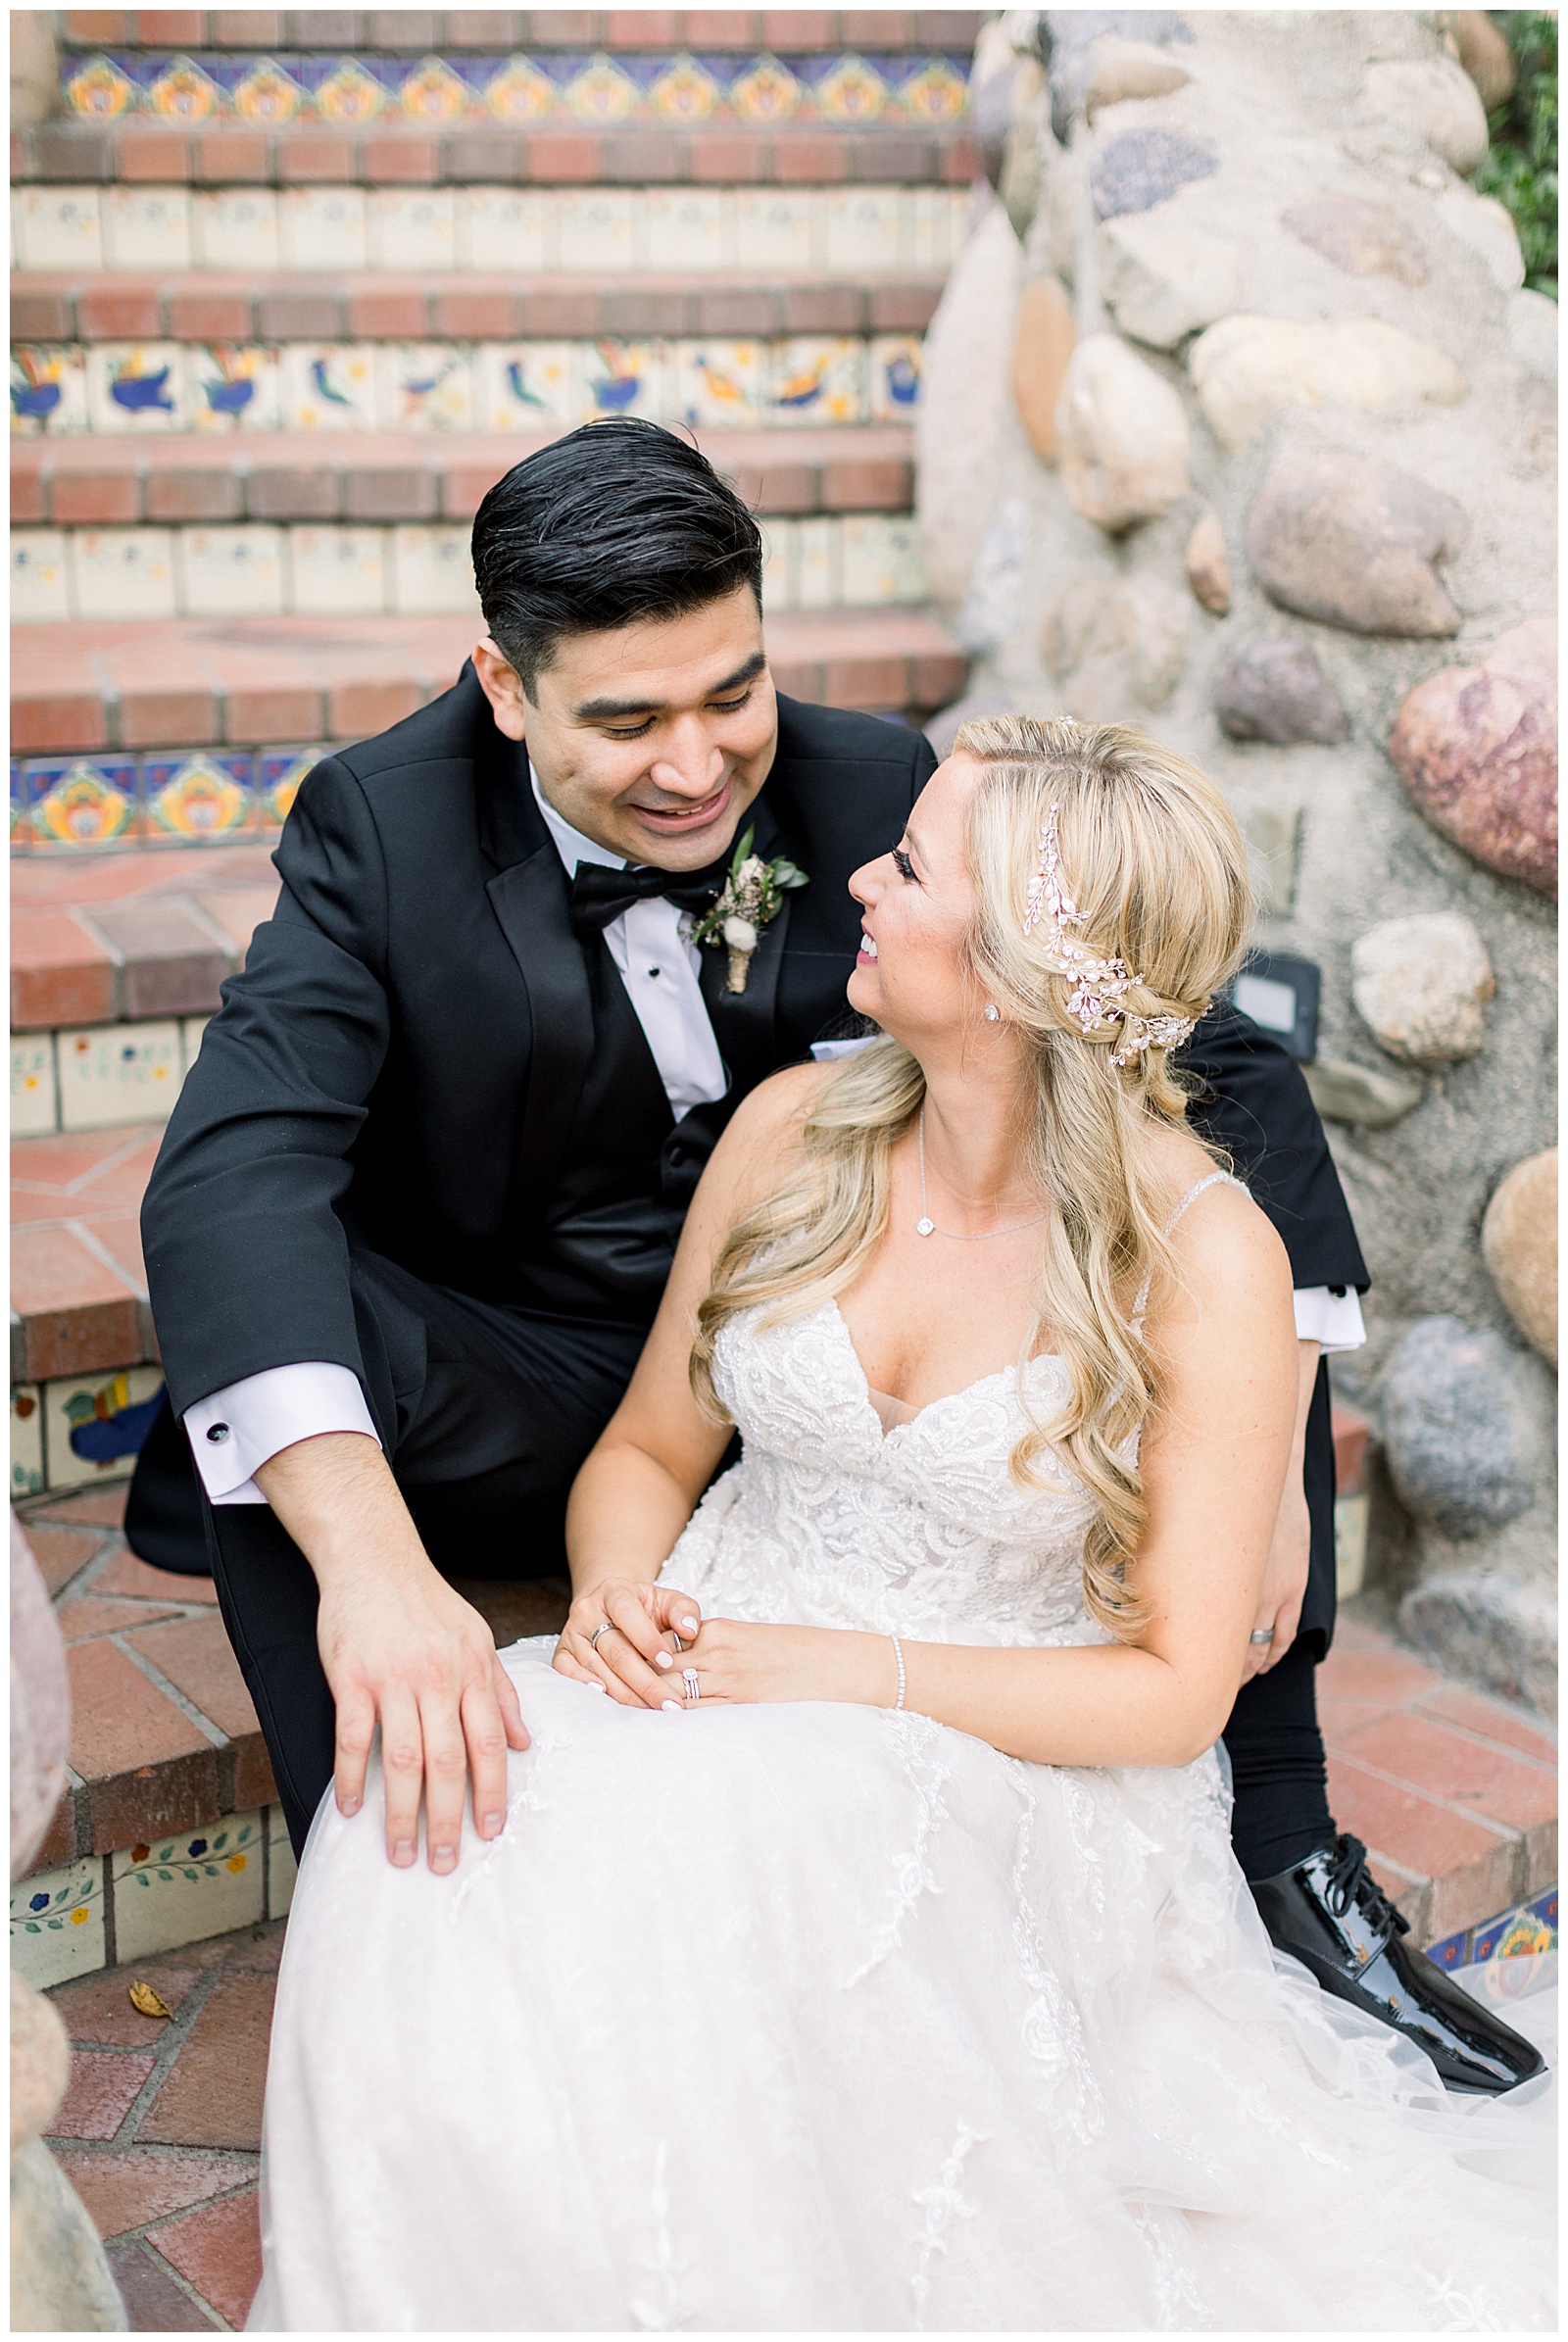 Bride and Groom Portraits on the Stairs at Rancho Las Lomas